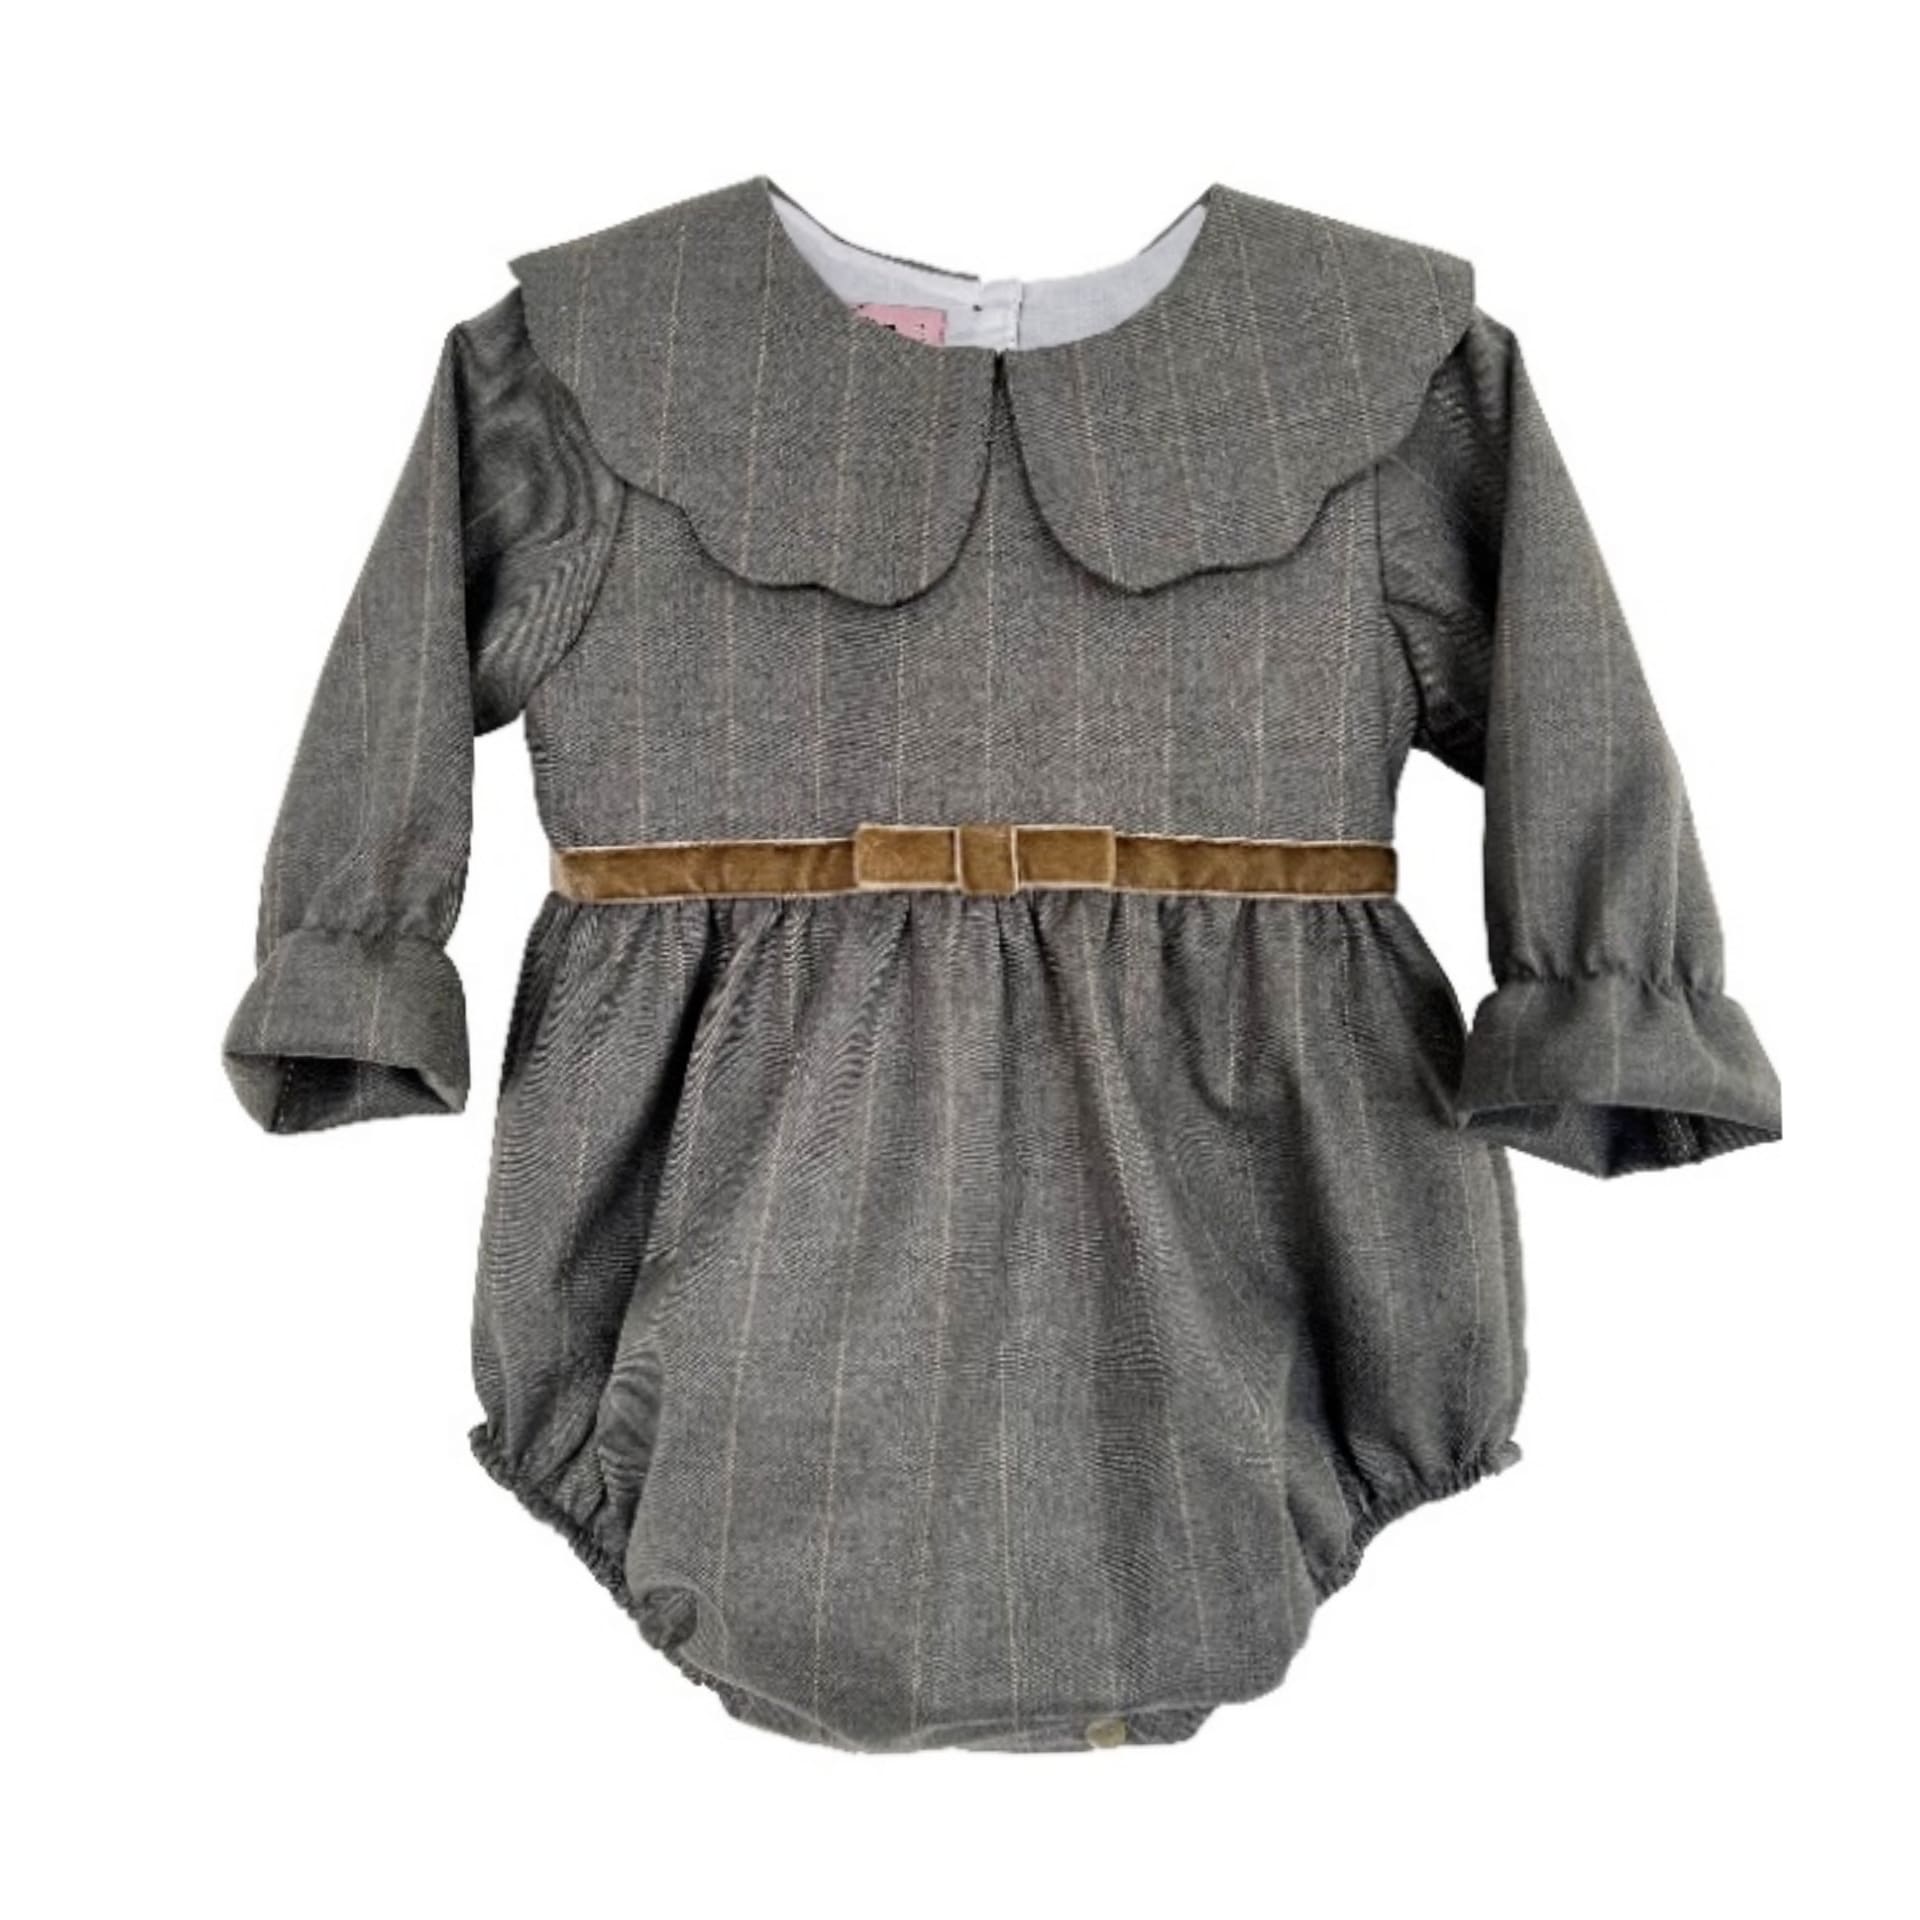 Grey with beoige stripes long sleeve romper